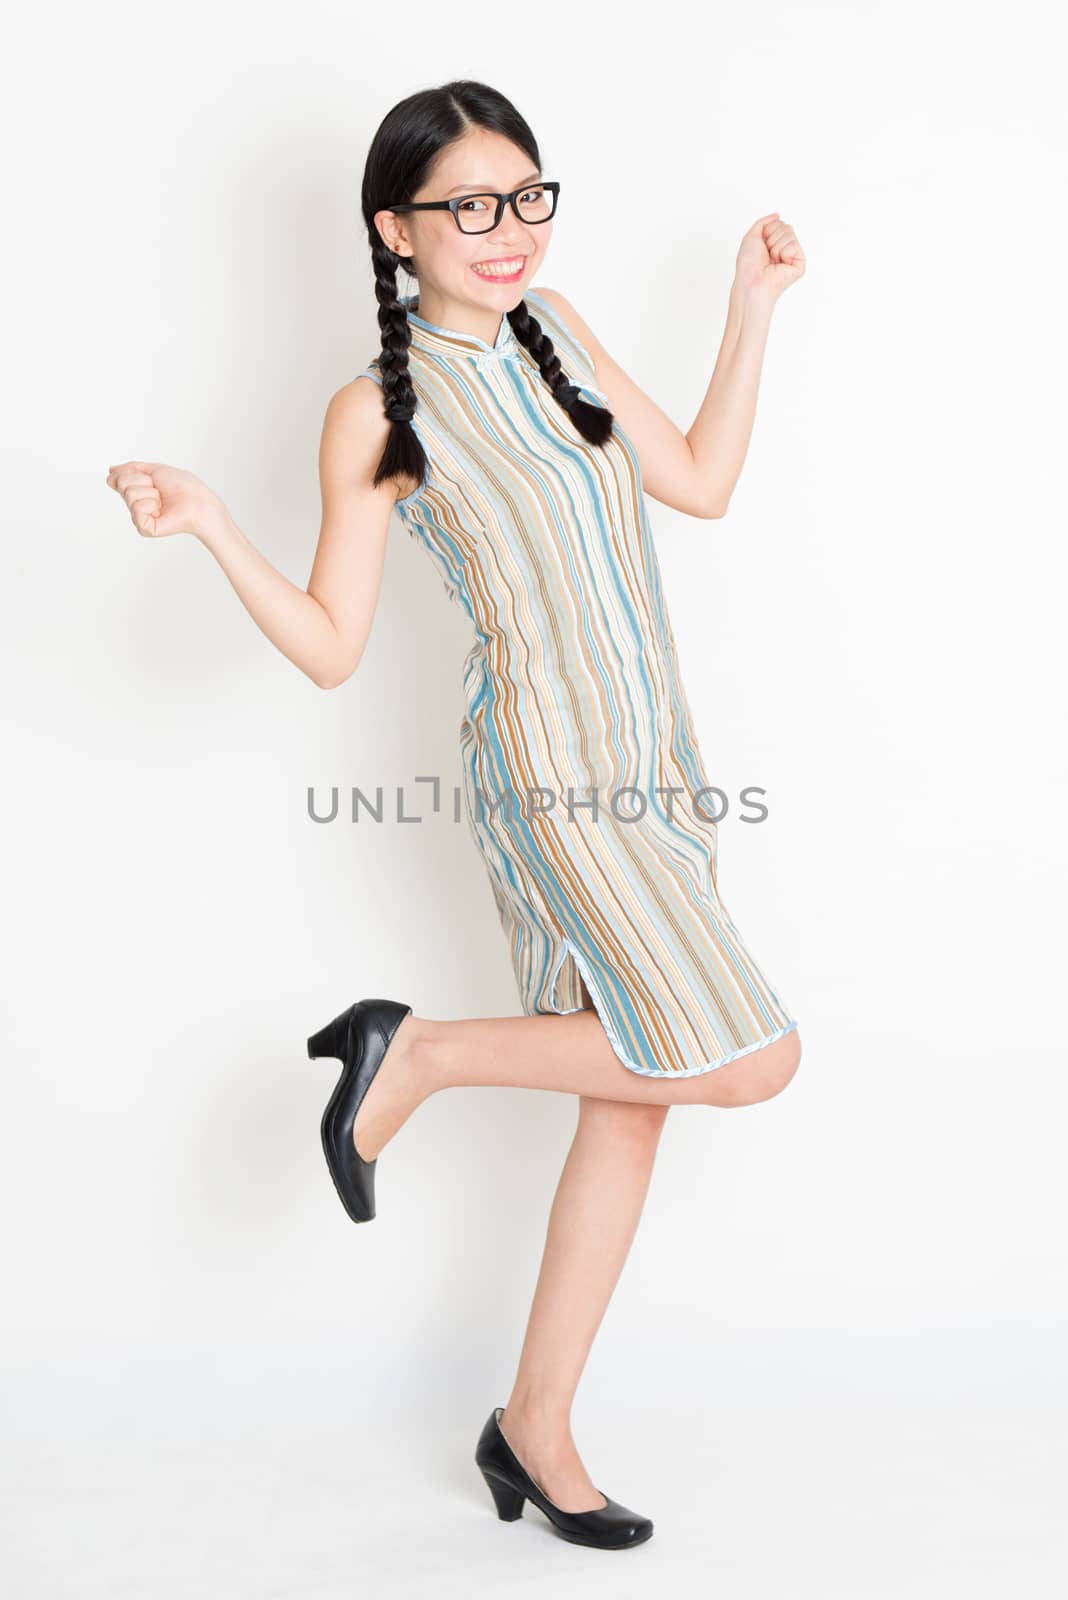 Excited Asian woman jumping around by szefei